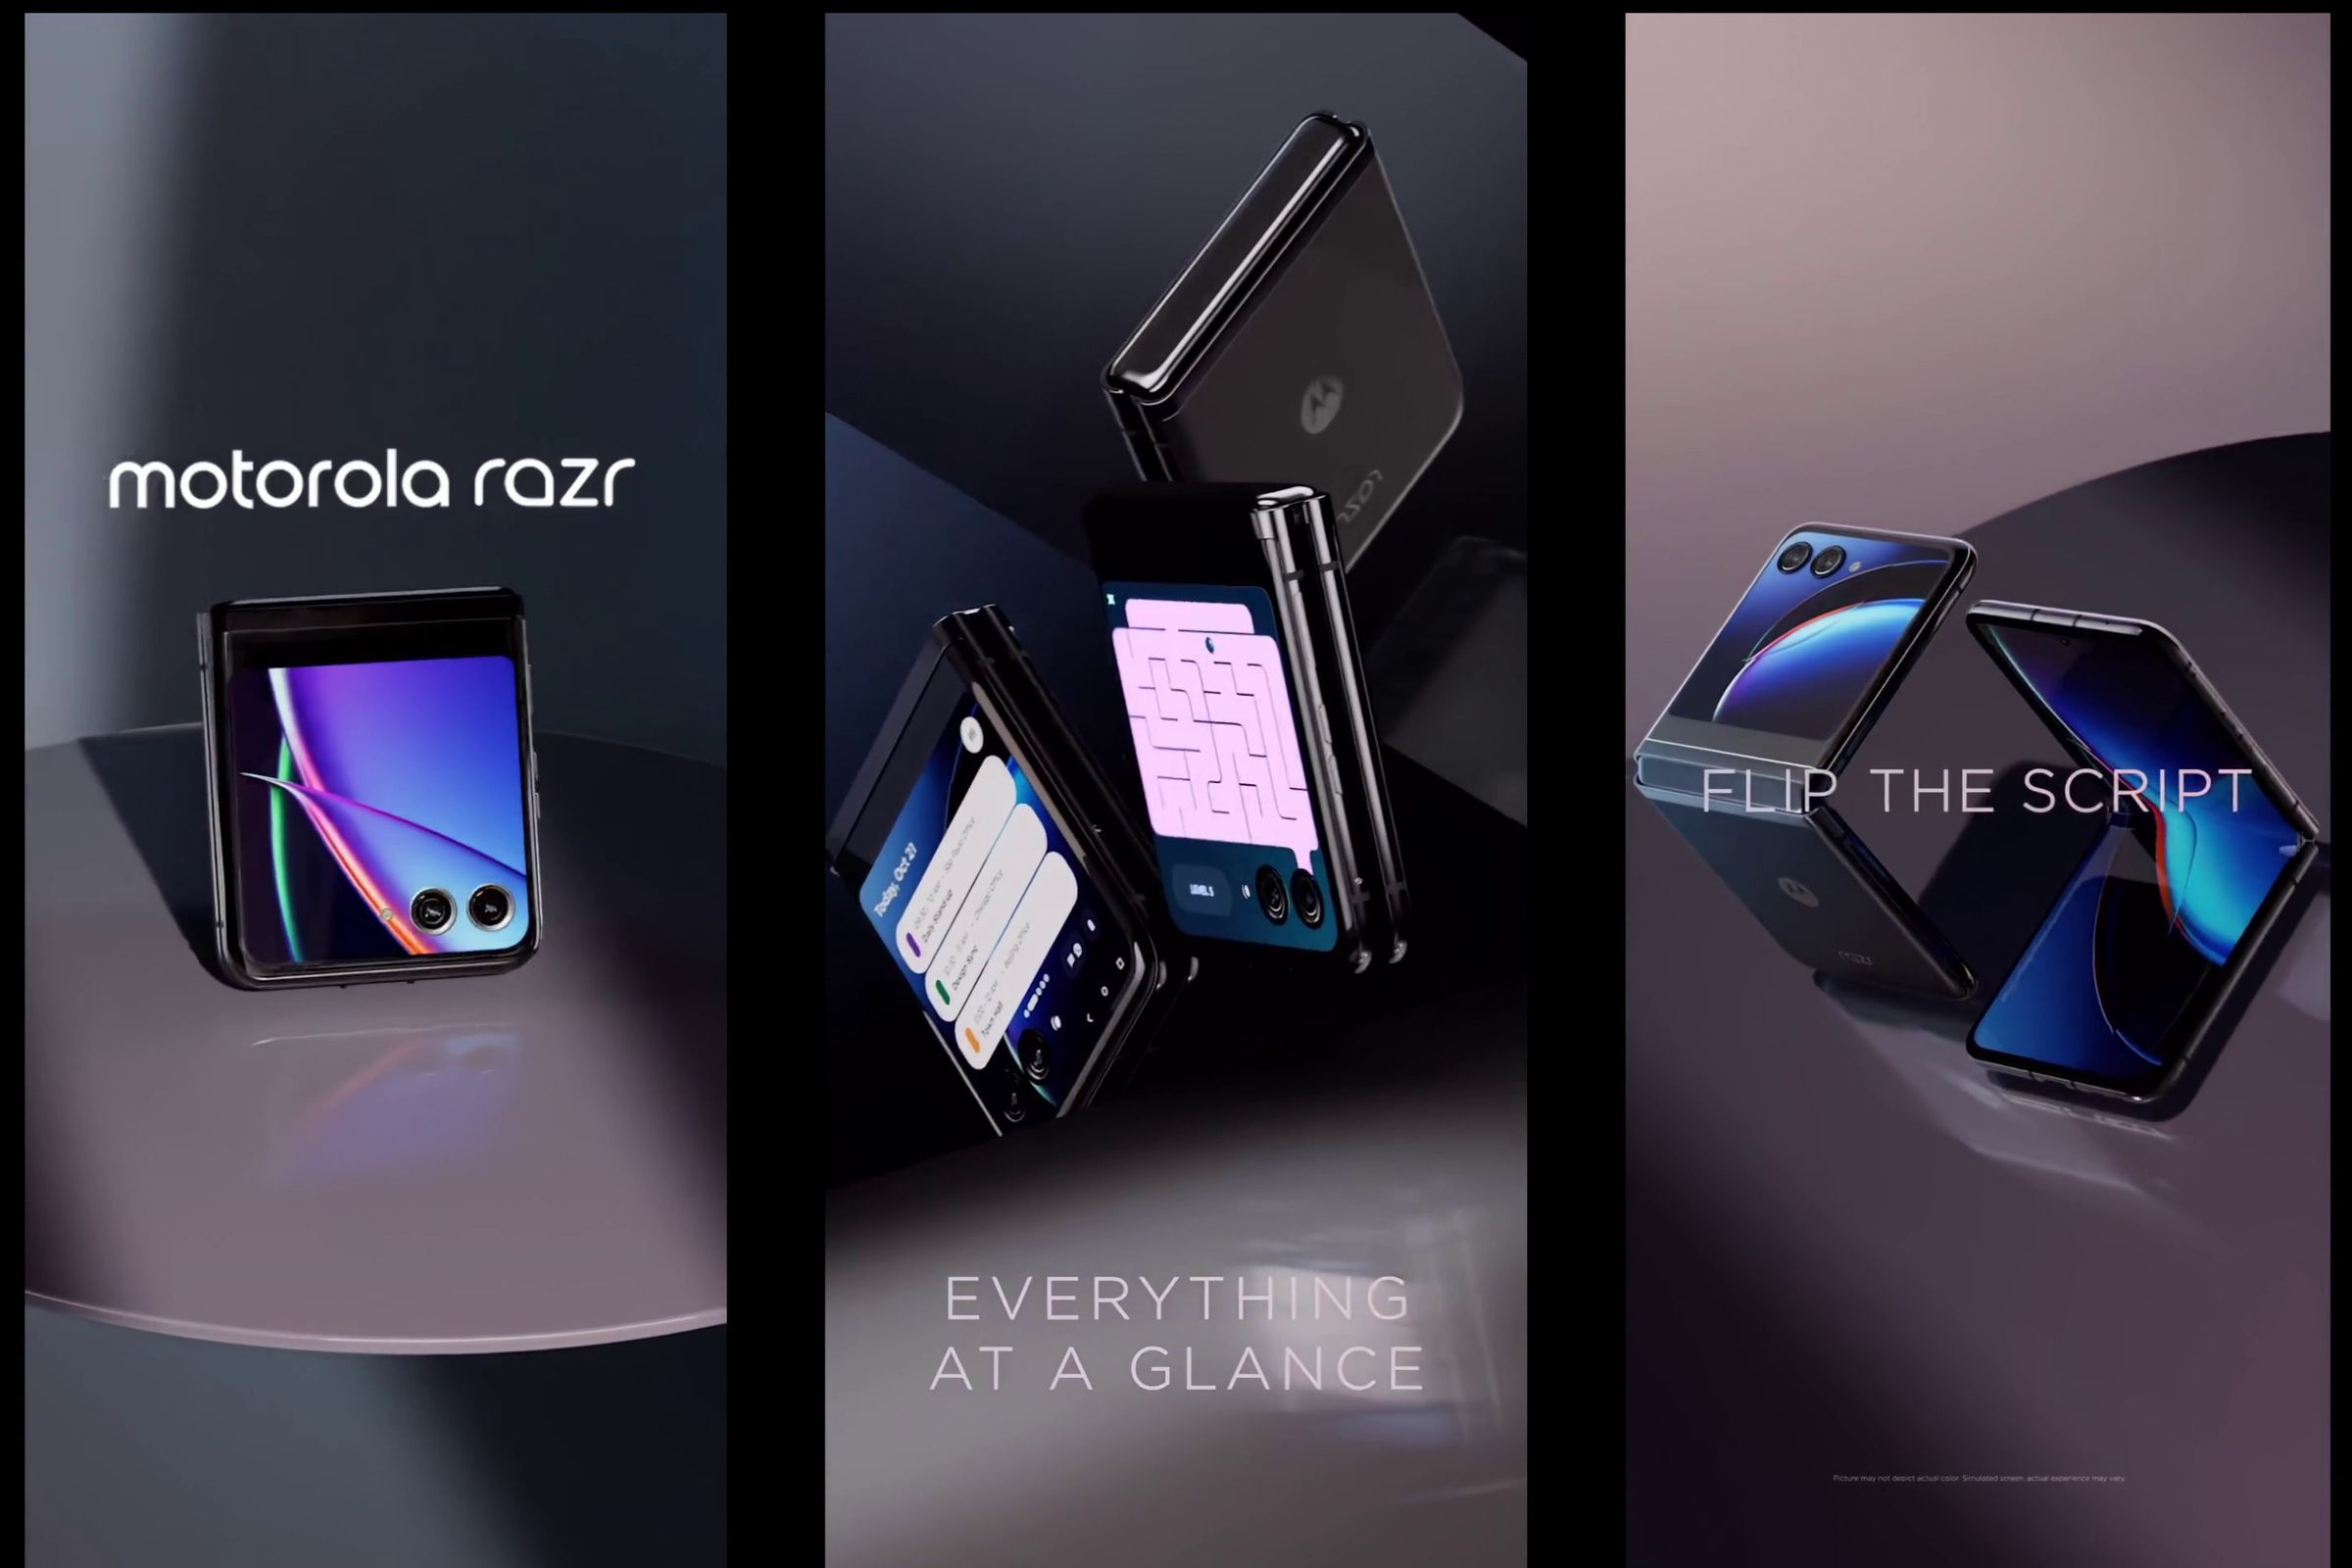 “Everything at a glance” and “Flip the script” text atop images of a folding phone, both folded and unfolded, showing off a pair of rear cameras, with light and shadow playing over the phone’s colorful screen as it floats in various positions above what seems like a table.